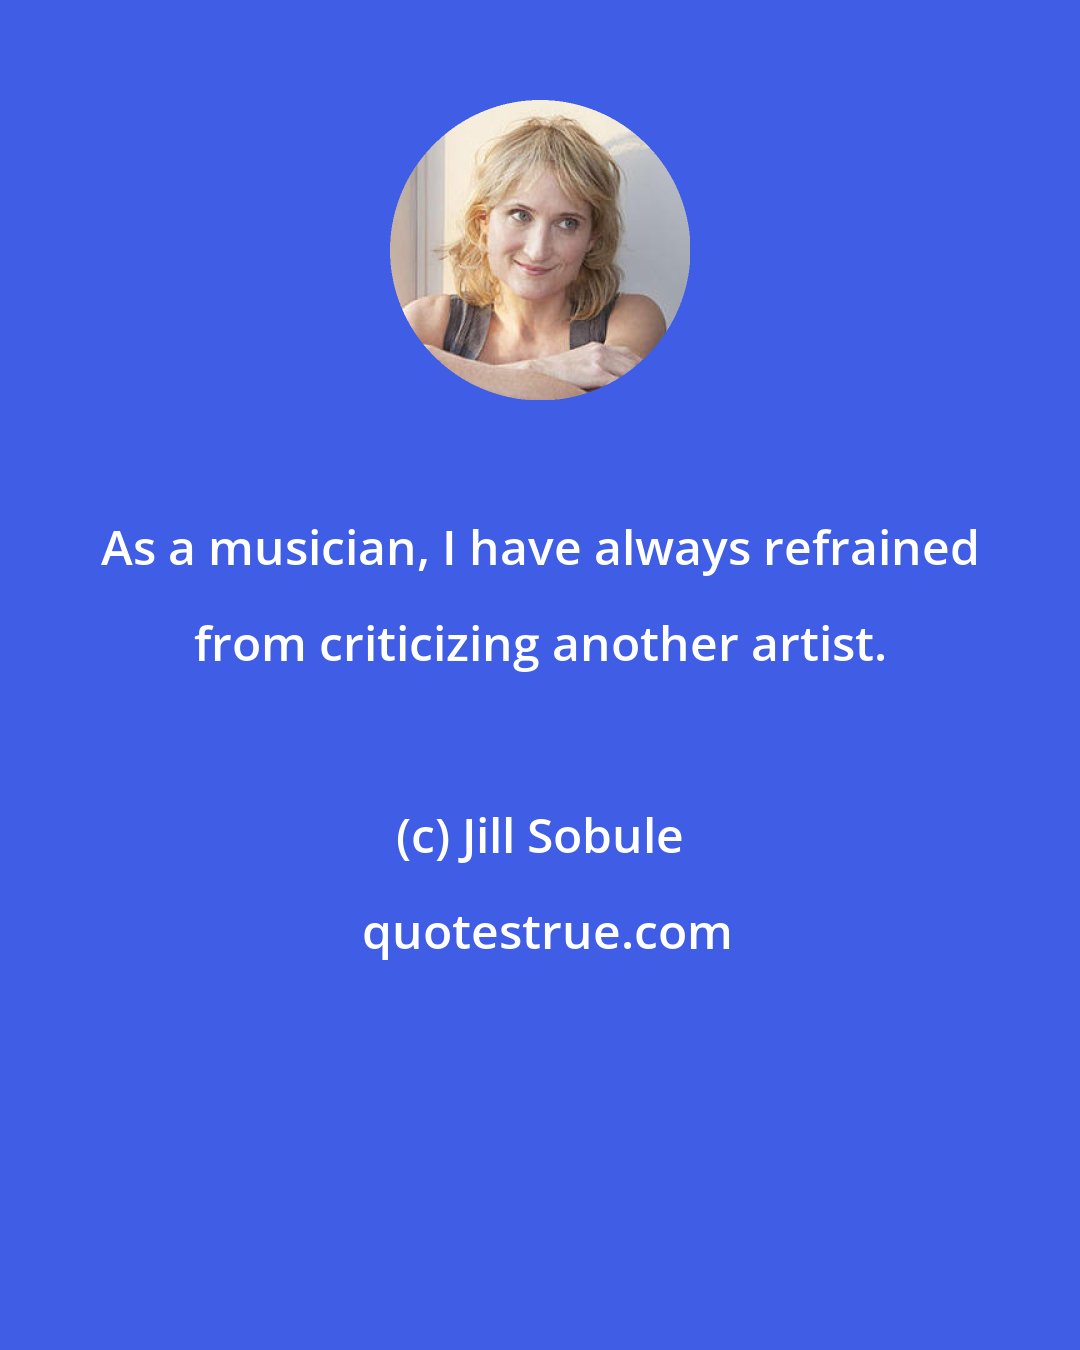 Jill Sobule: As a musician, I have always refrained from criticizing another artist.